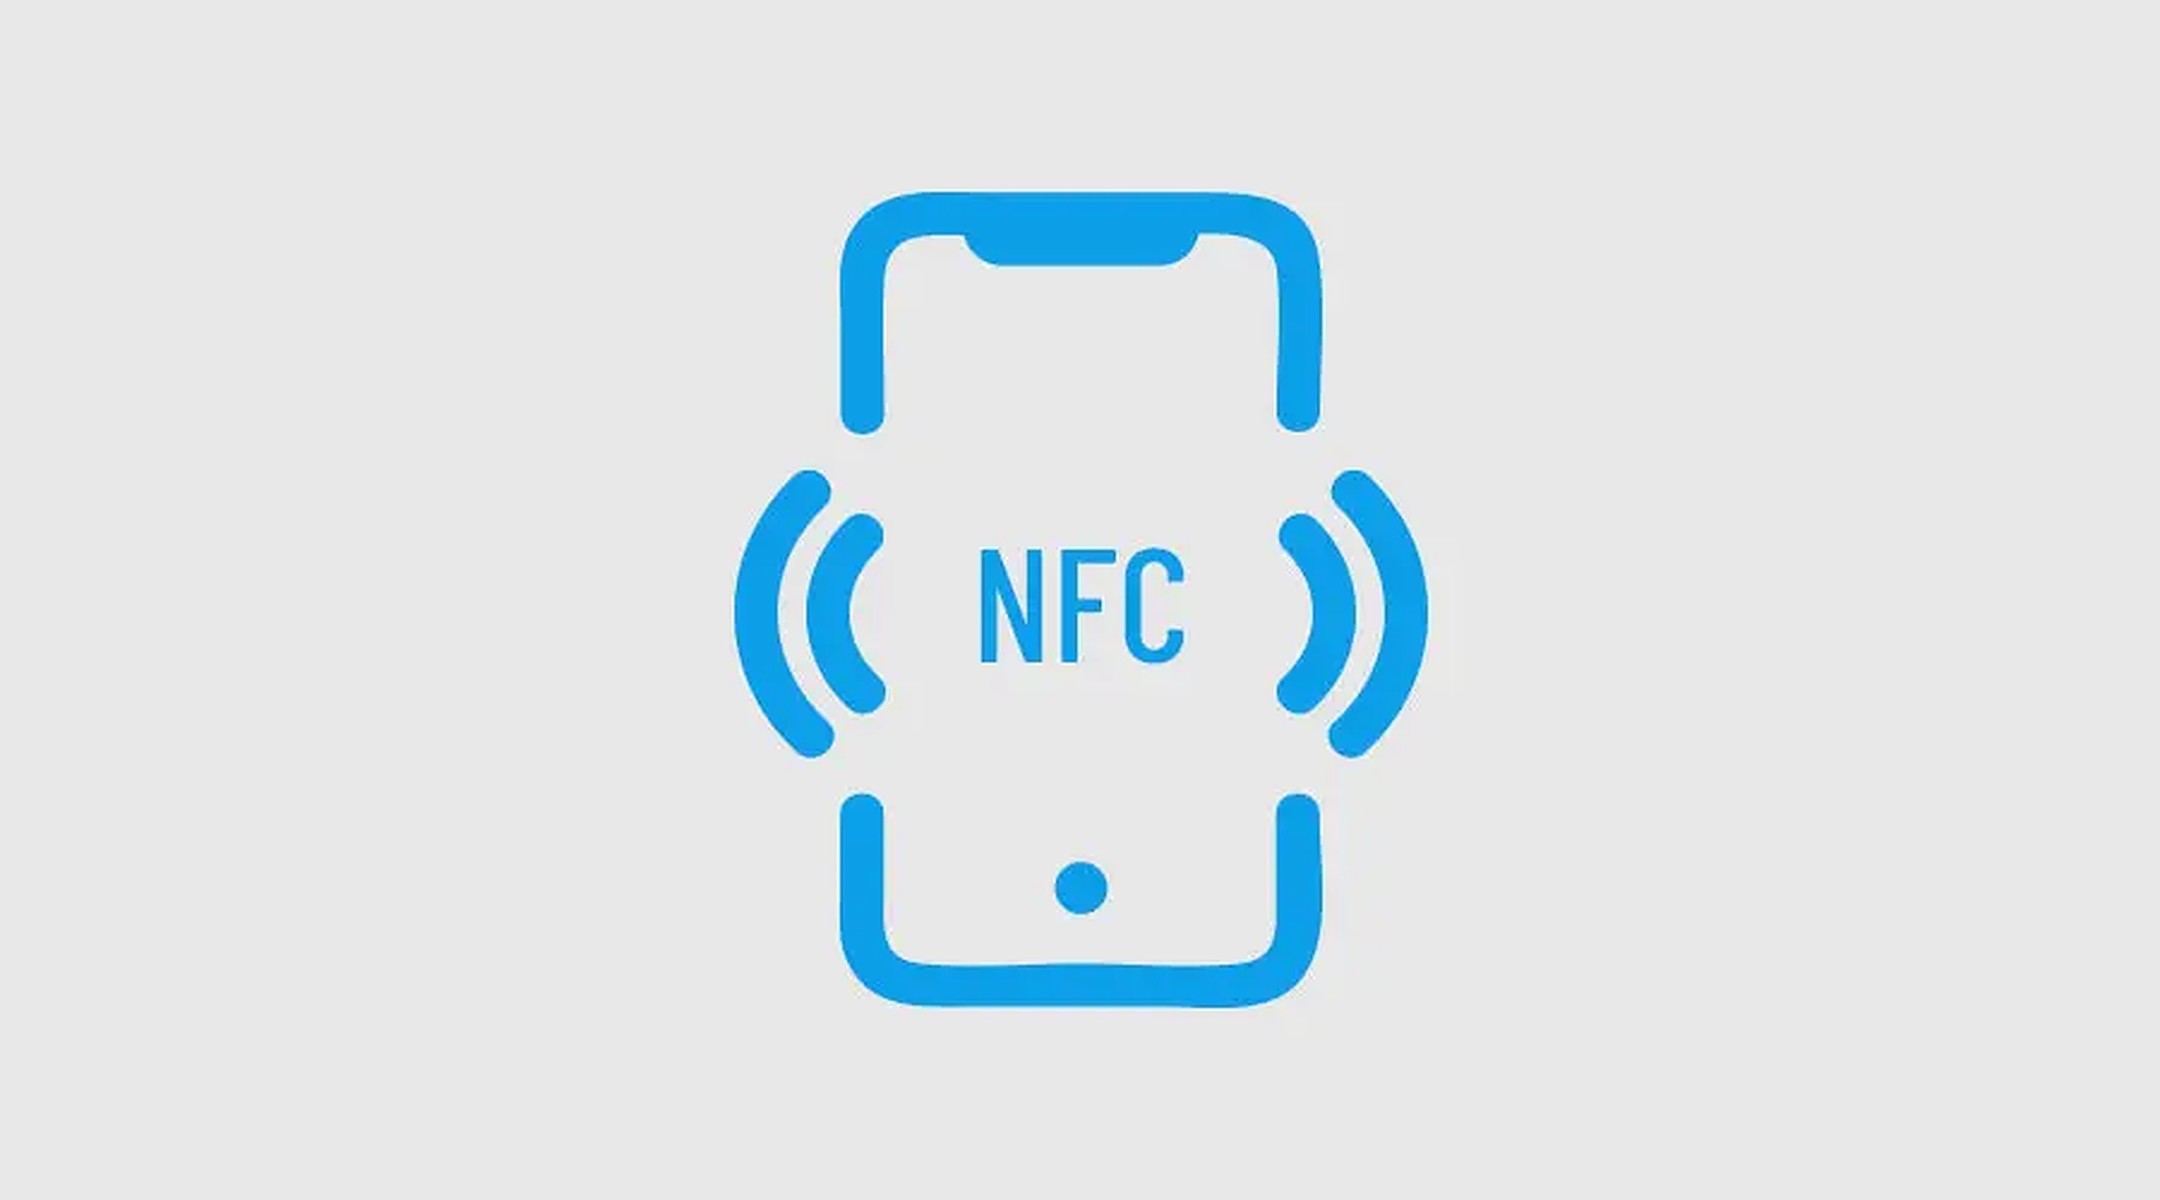 More powerful NFC by 2028: big news on the way